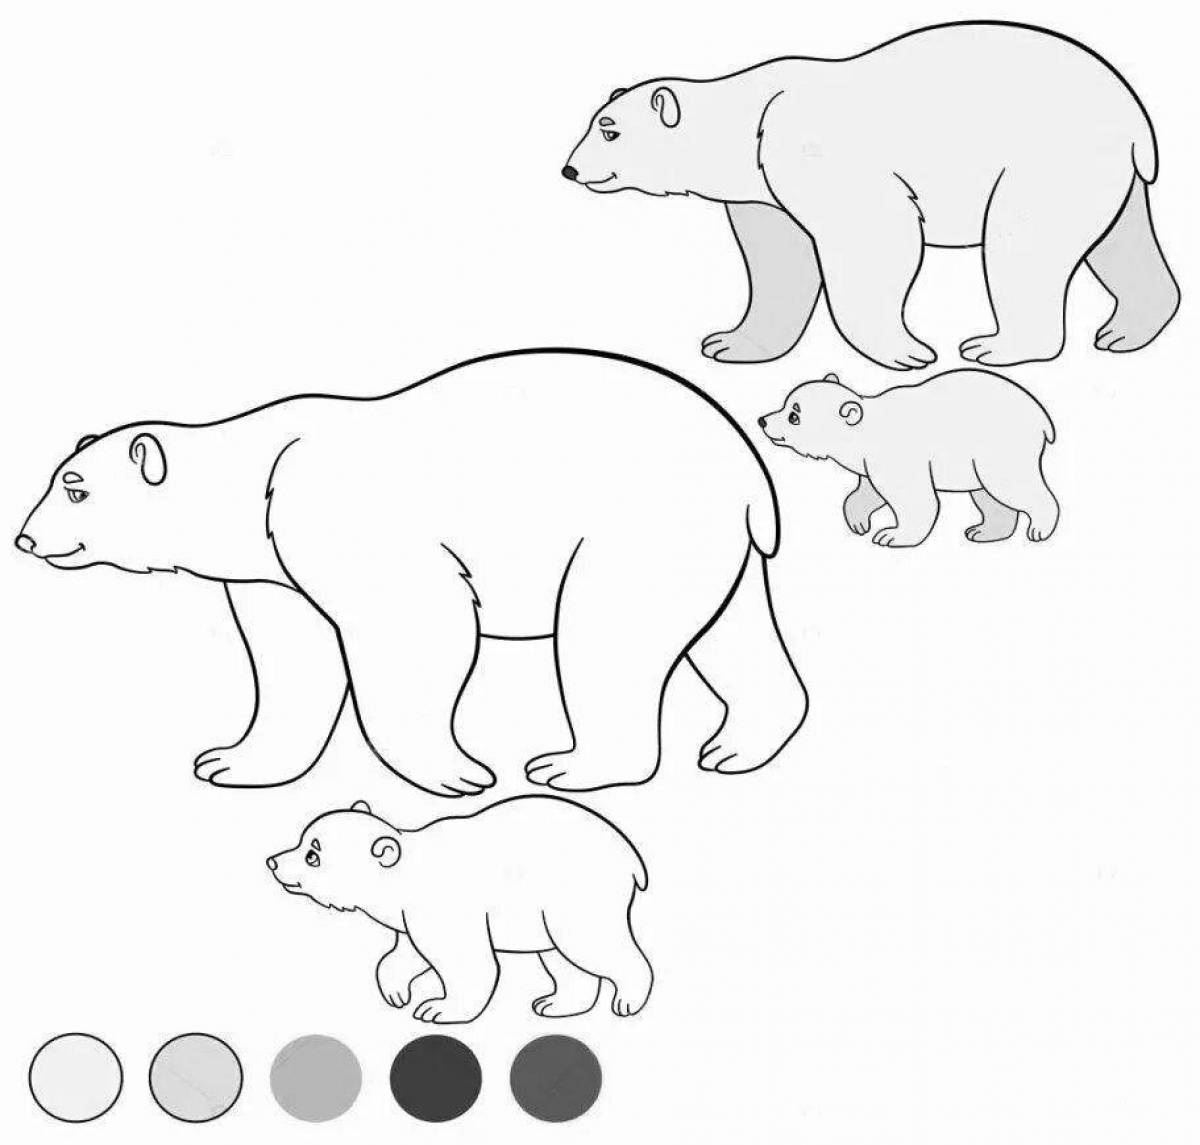 Coloring bright teddy bear with cubs